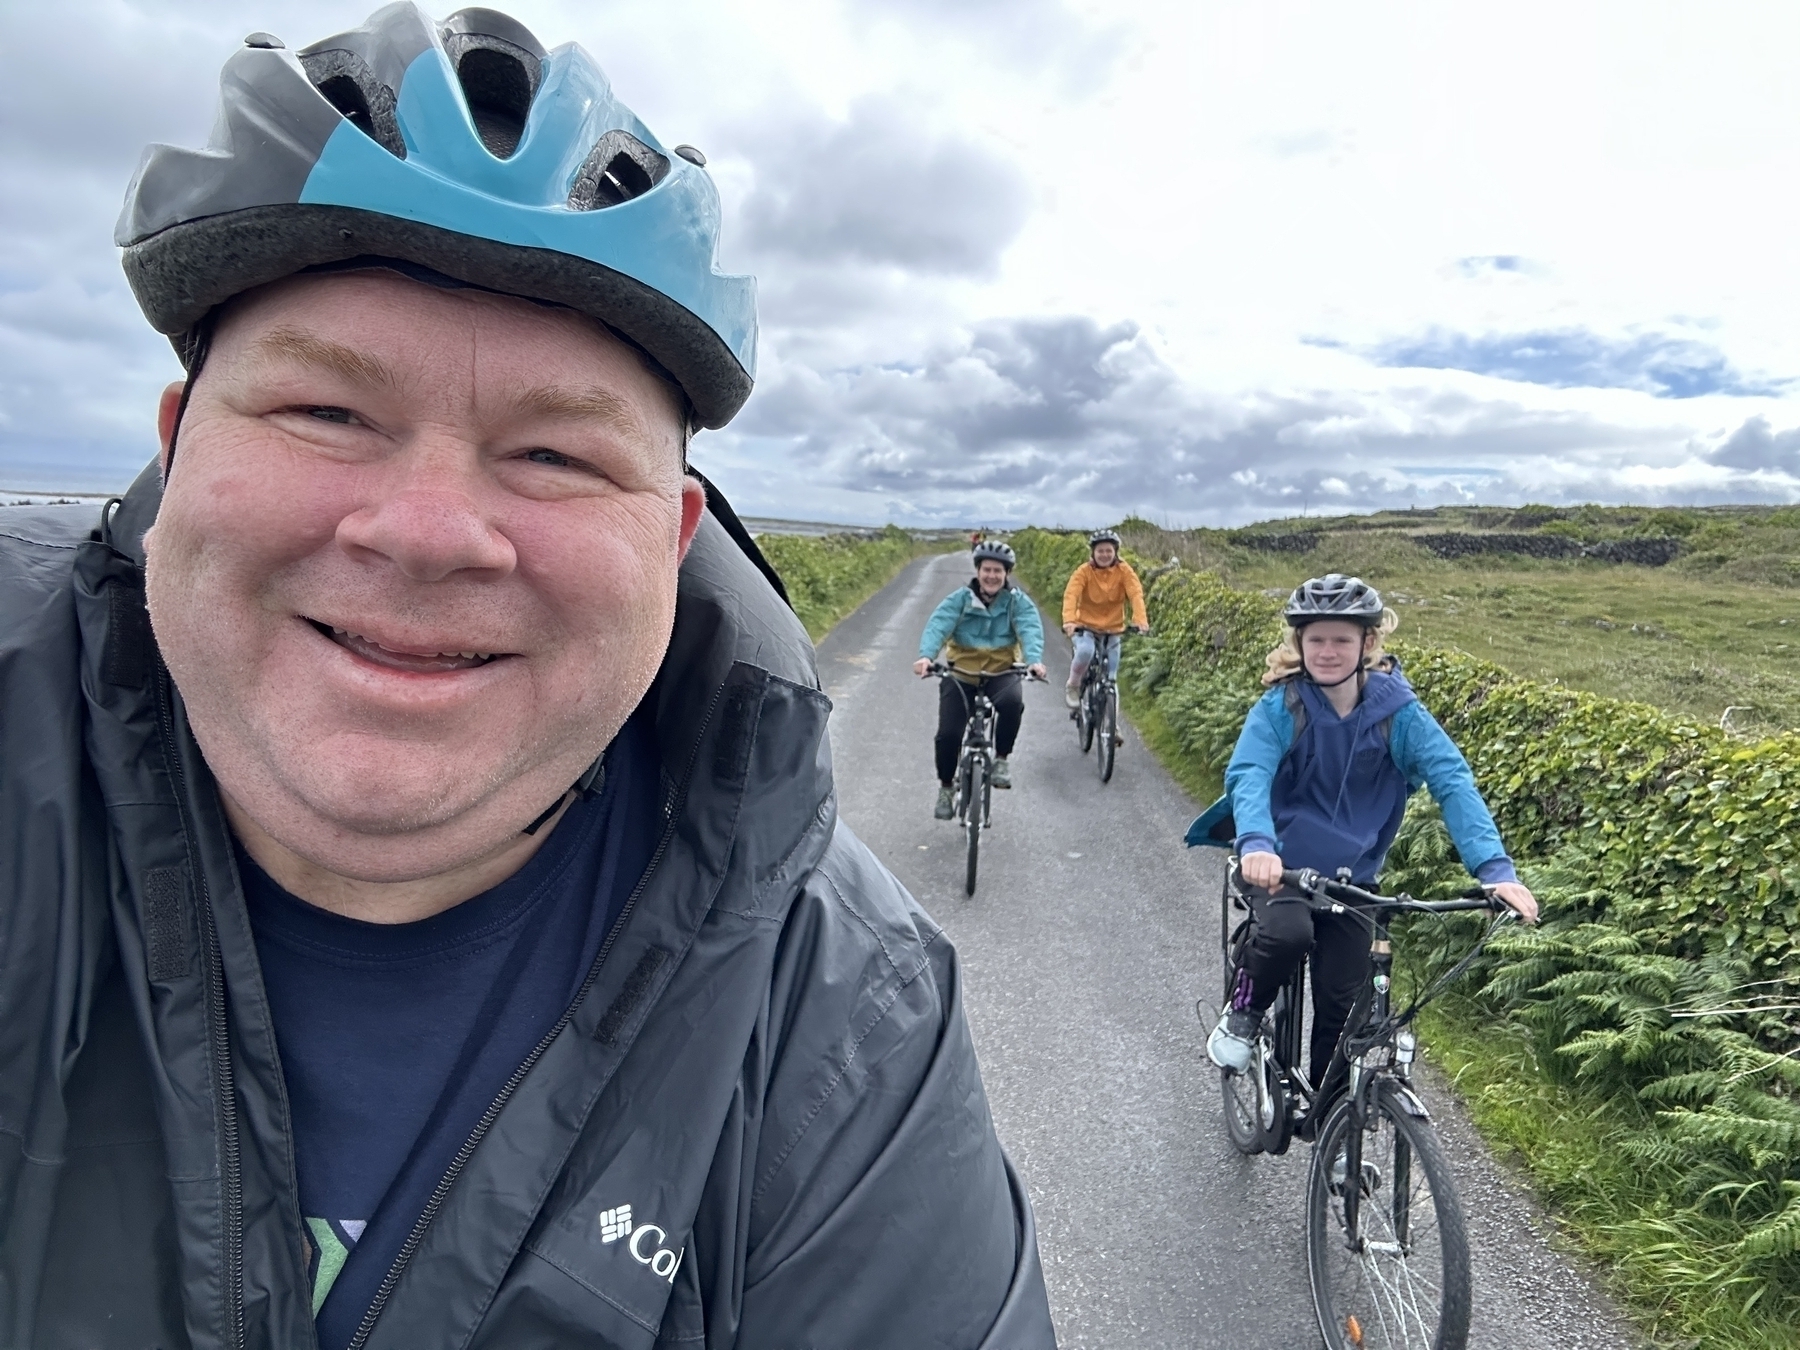 Auto-generated description: A group of people wearing helmets are riding bicycles on a narrow road with greenery on both sides, with one person taking a selfie from the front.